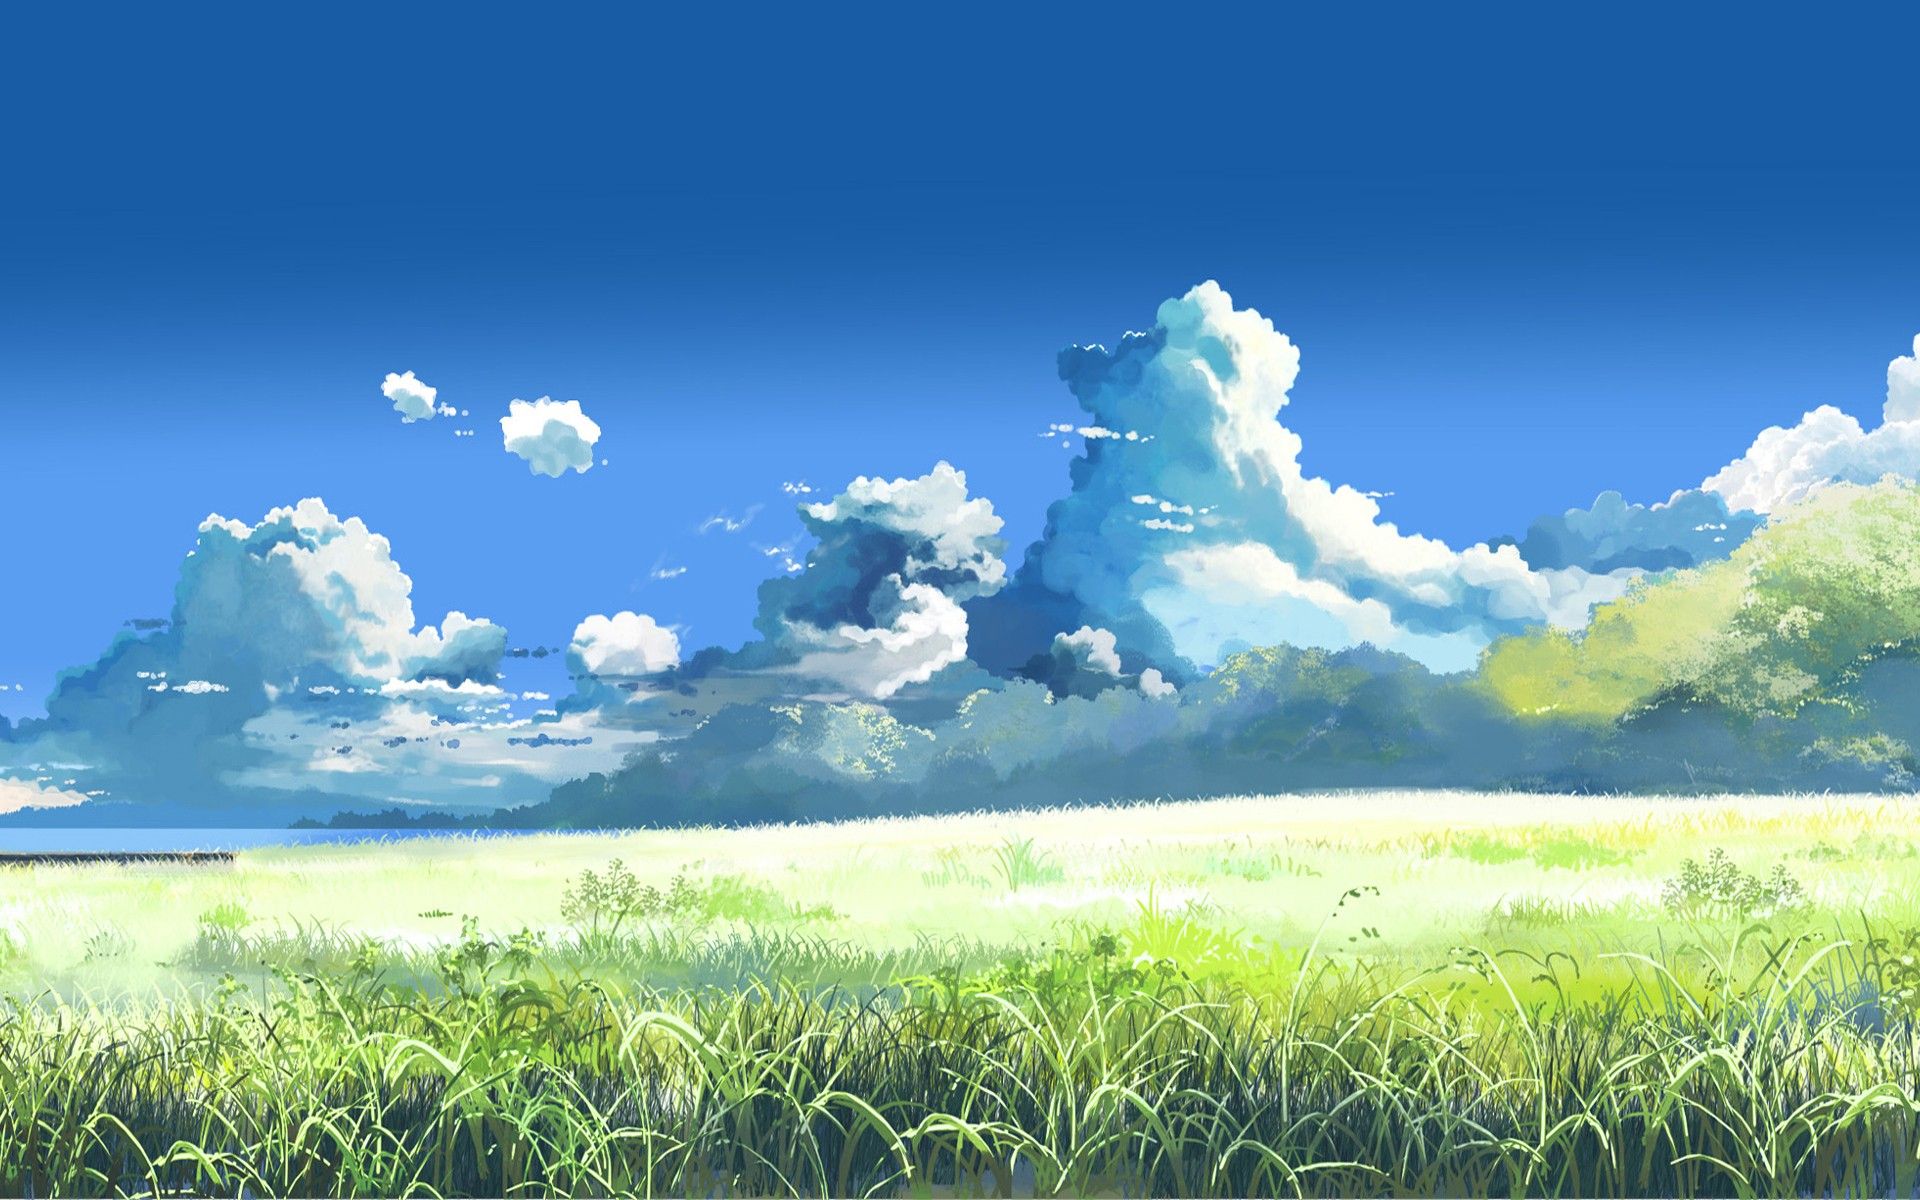 Anime / manga looking clouds ? and Rendering